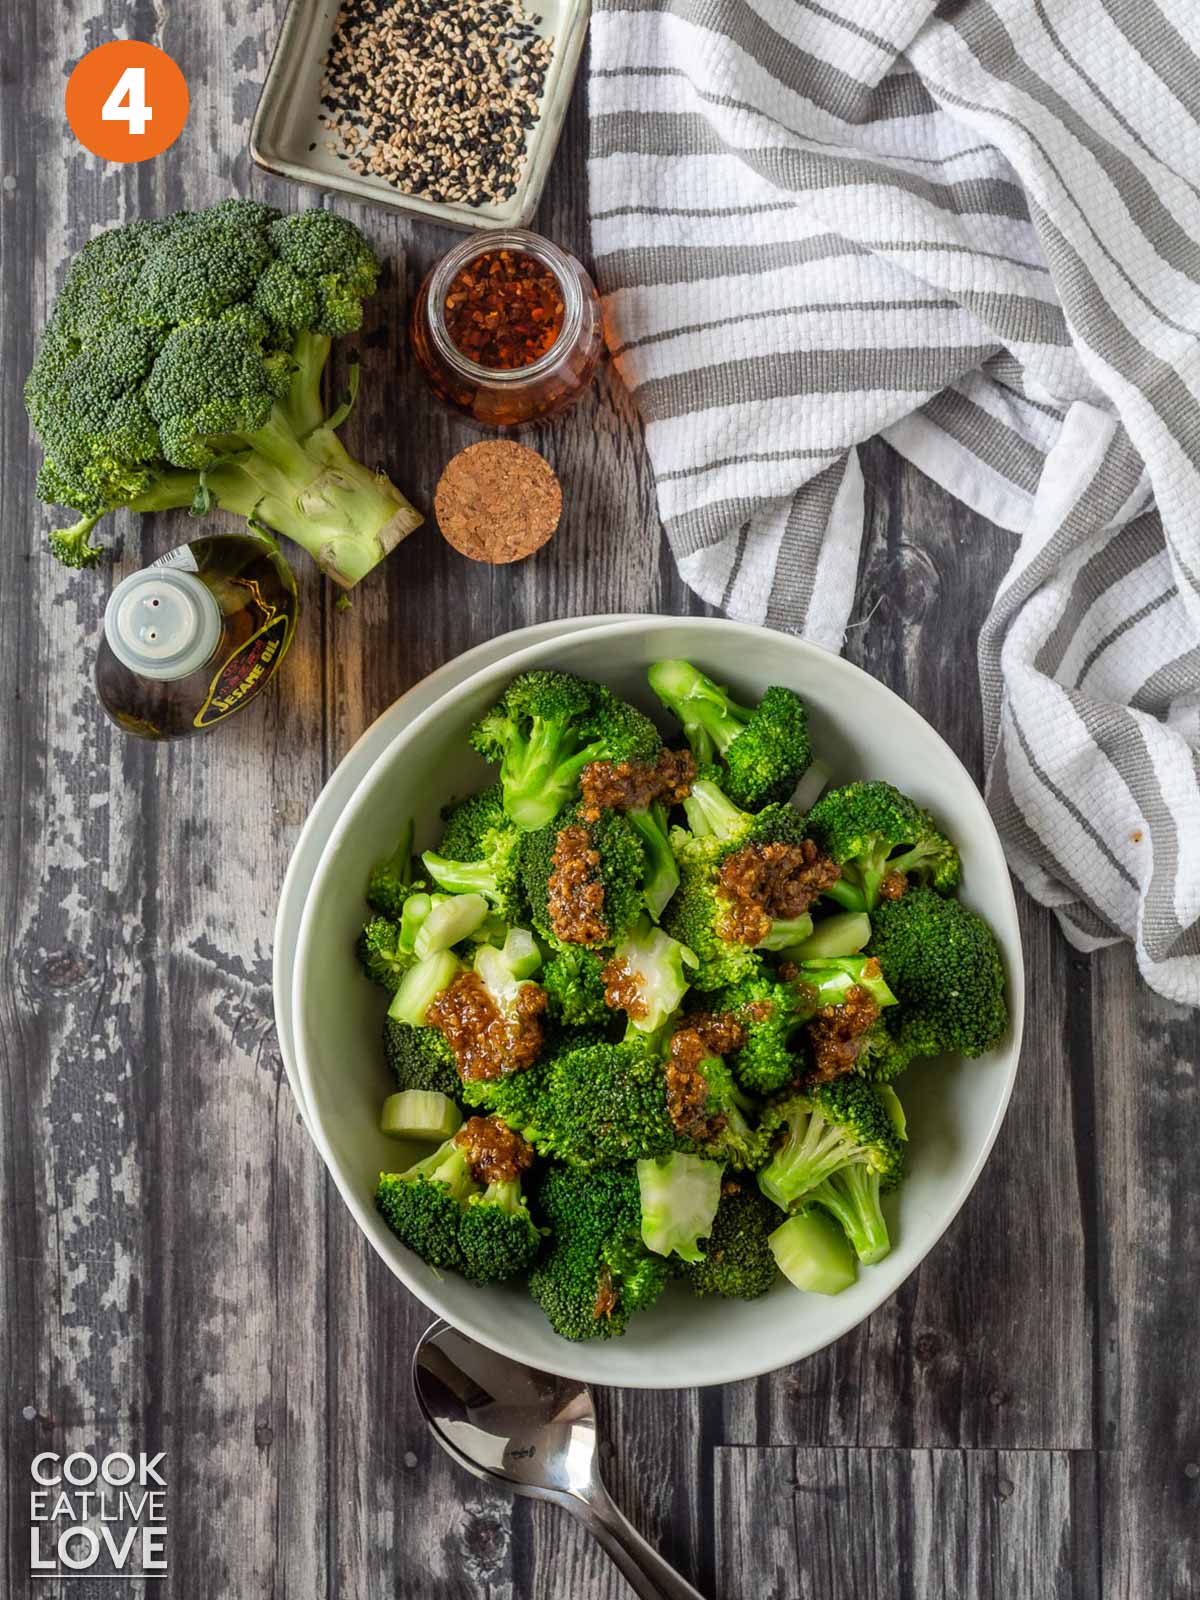 A bowl of broccoli topped with an Asian marinade.